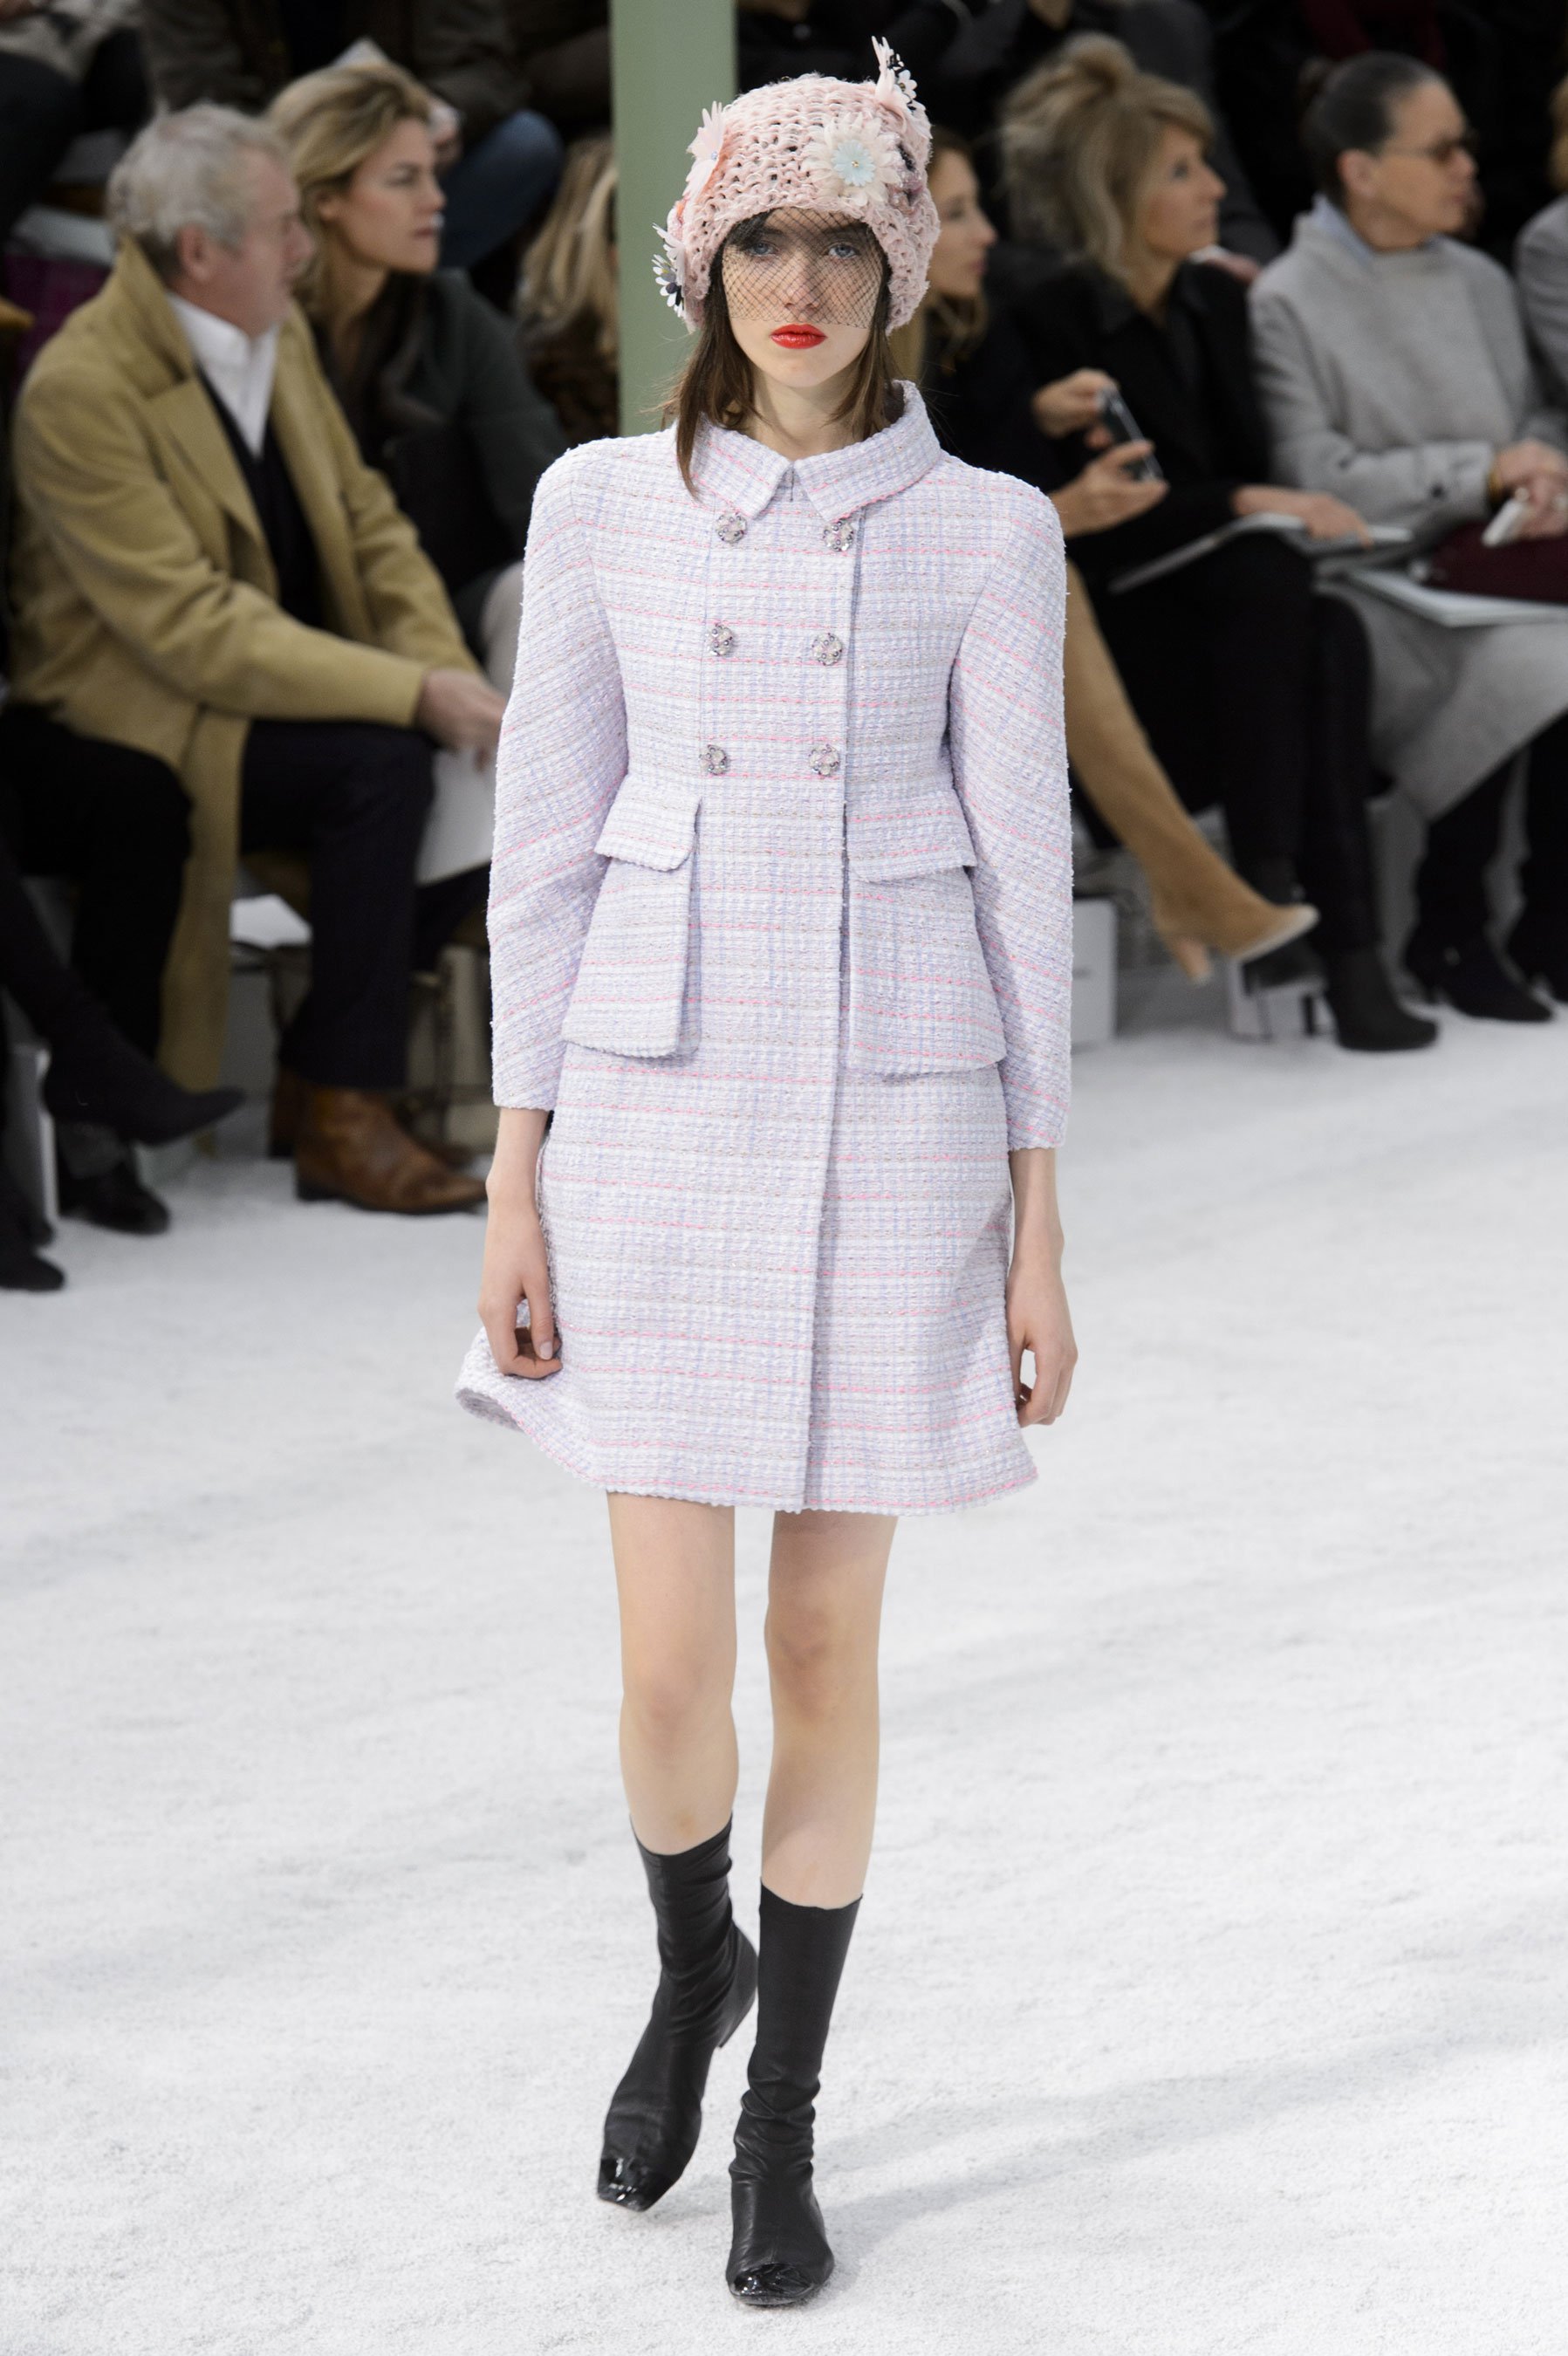 chanel haute couture spring 2015 pfw 12 grace